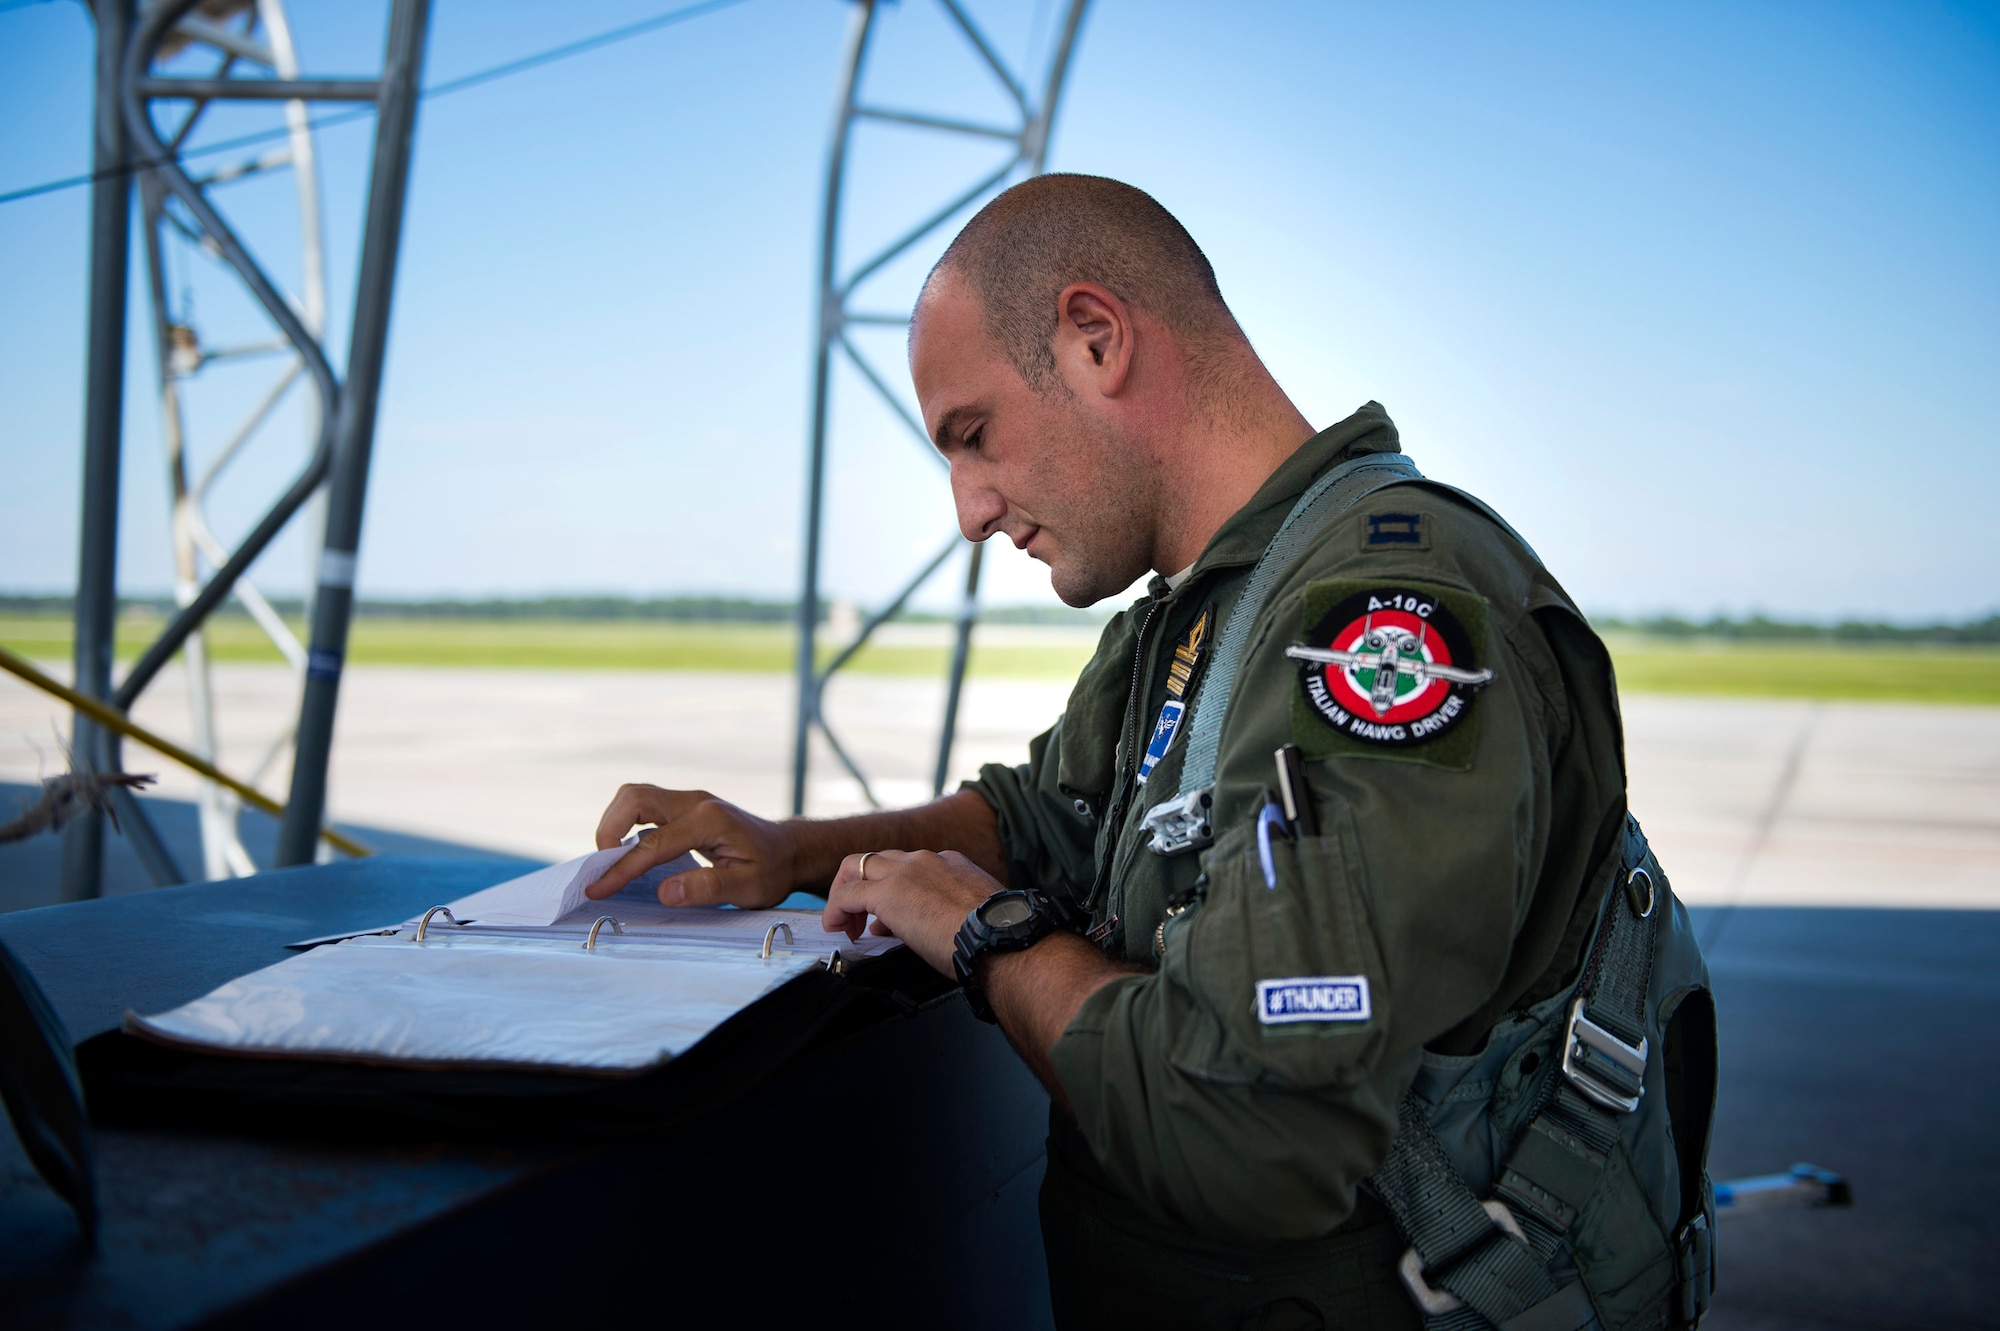 Italian exchange pilot Roberto Manzo, 74th Fighter Squadron training assistant, checks paperwork before a flight, Aug. 25, 2016, at Moody Air Force Base, Ga. In September 2015, Manzo was chosen to participate in the exchange pilot program, which gives American pilots and coalition, or foreign ally, counterparts the opportunity to embed in another fighter squadron and master another airframe. (U.S. Air Force photo by Airman 1st Class Janiqua P. Robinson)